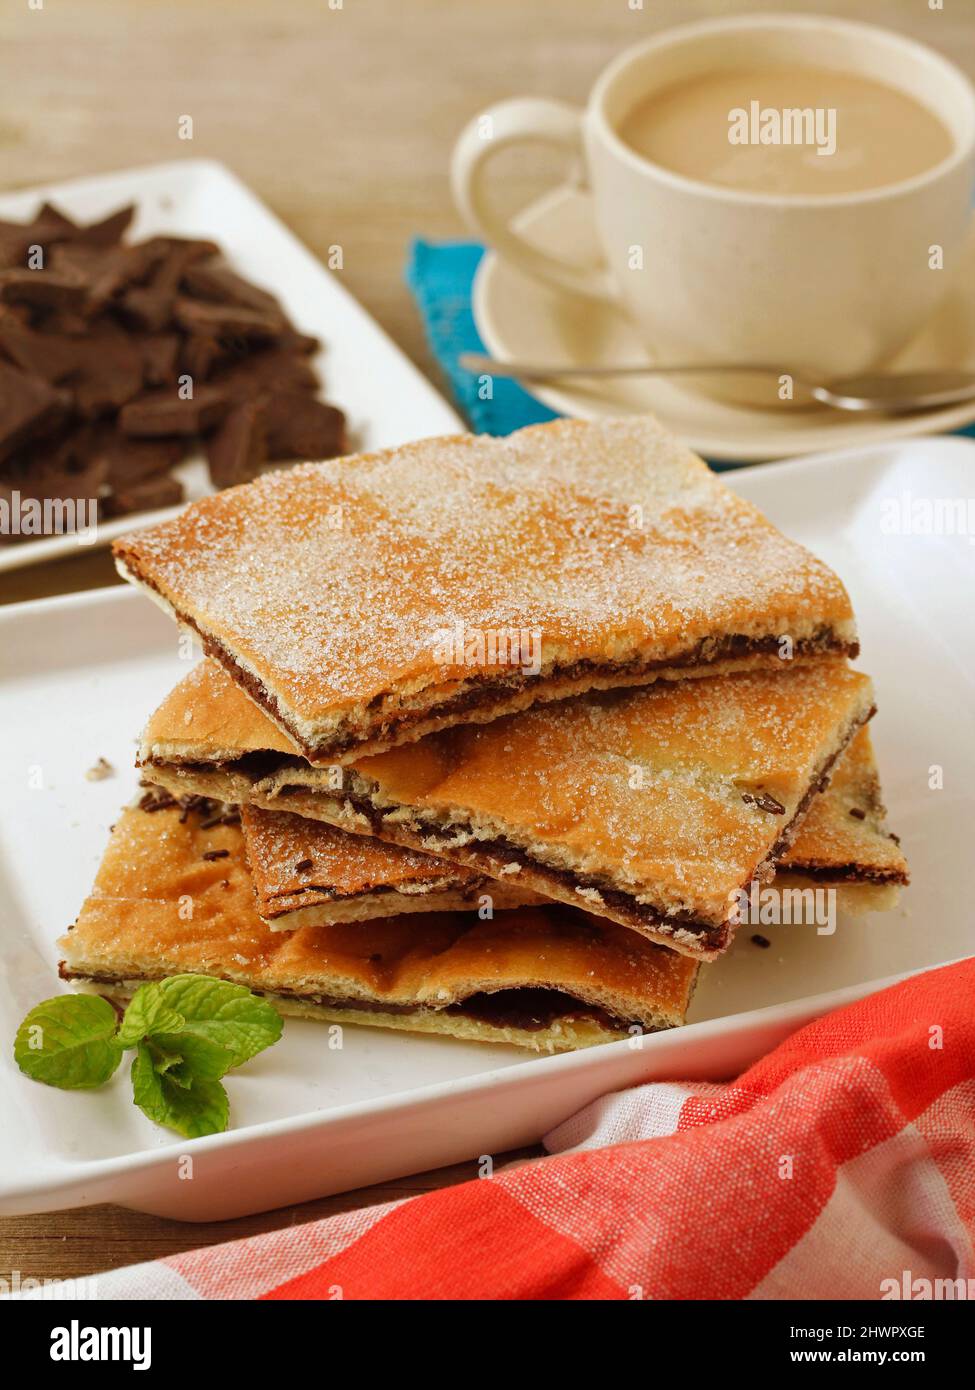 Coca filled with chocolate. Typical food from Catalonia, Spain. Stock Photo